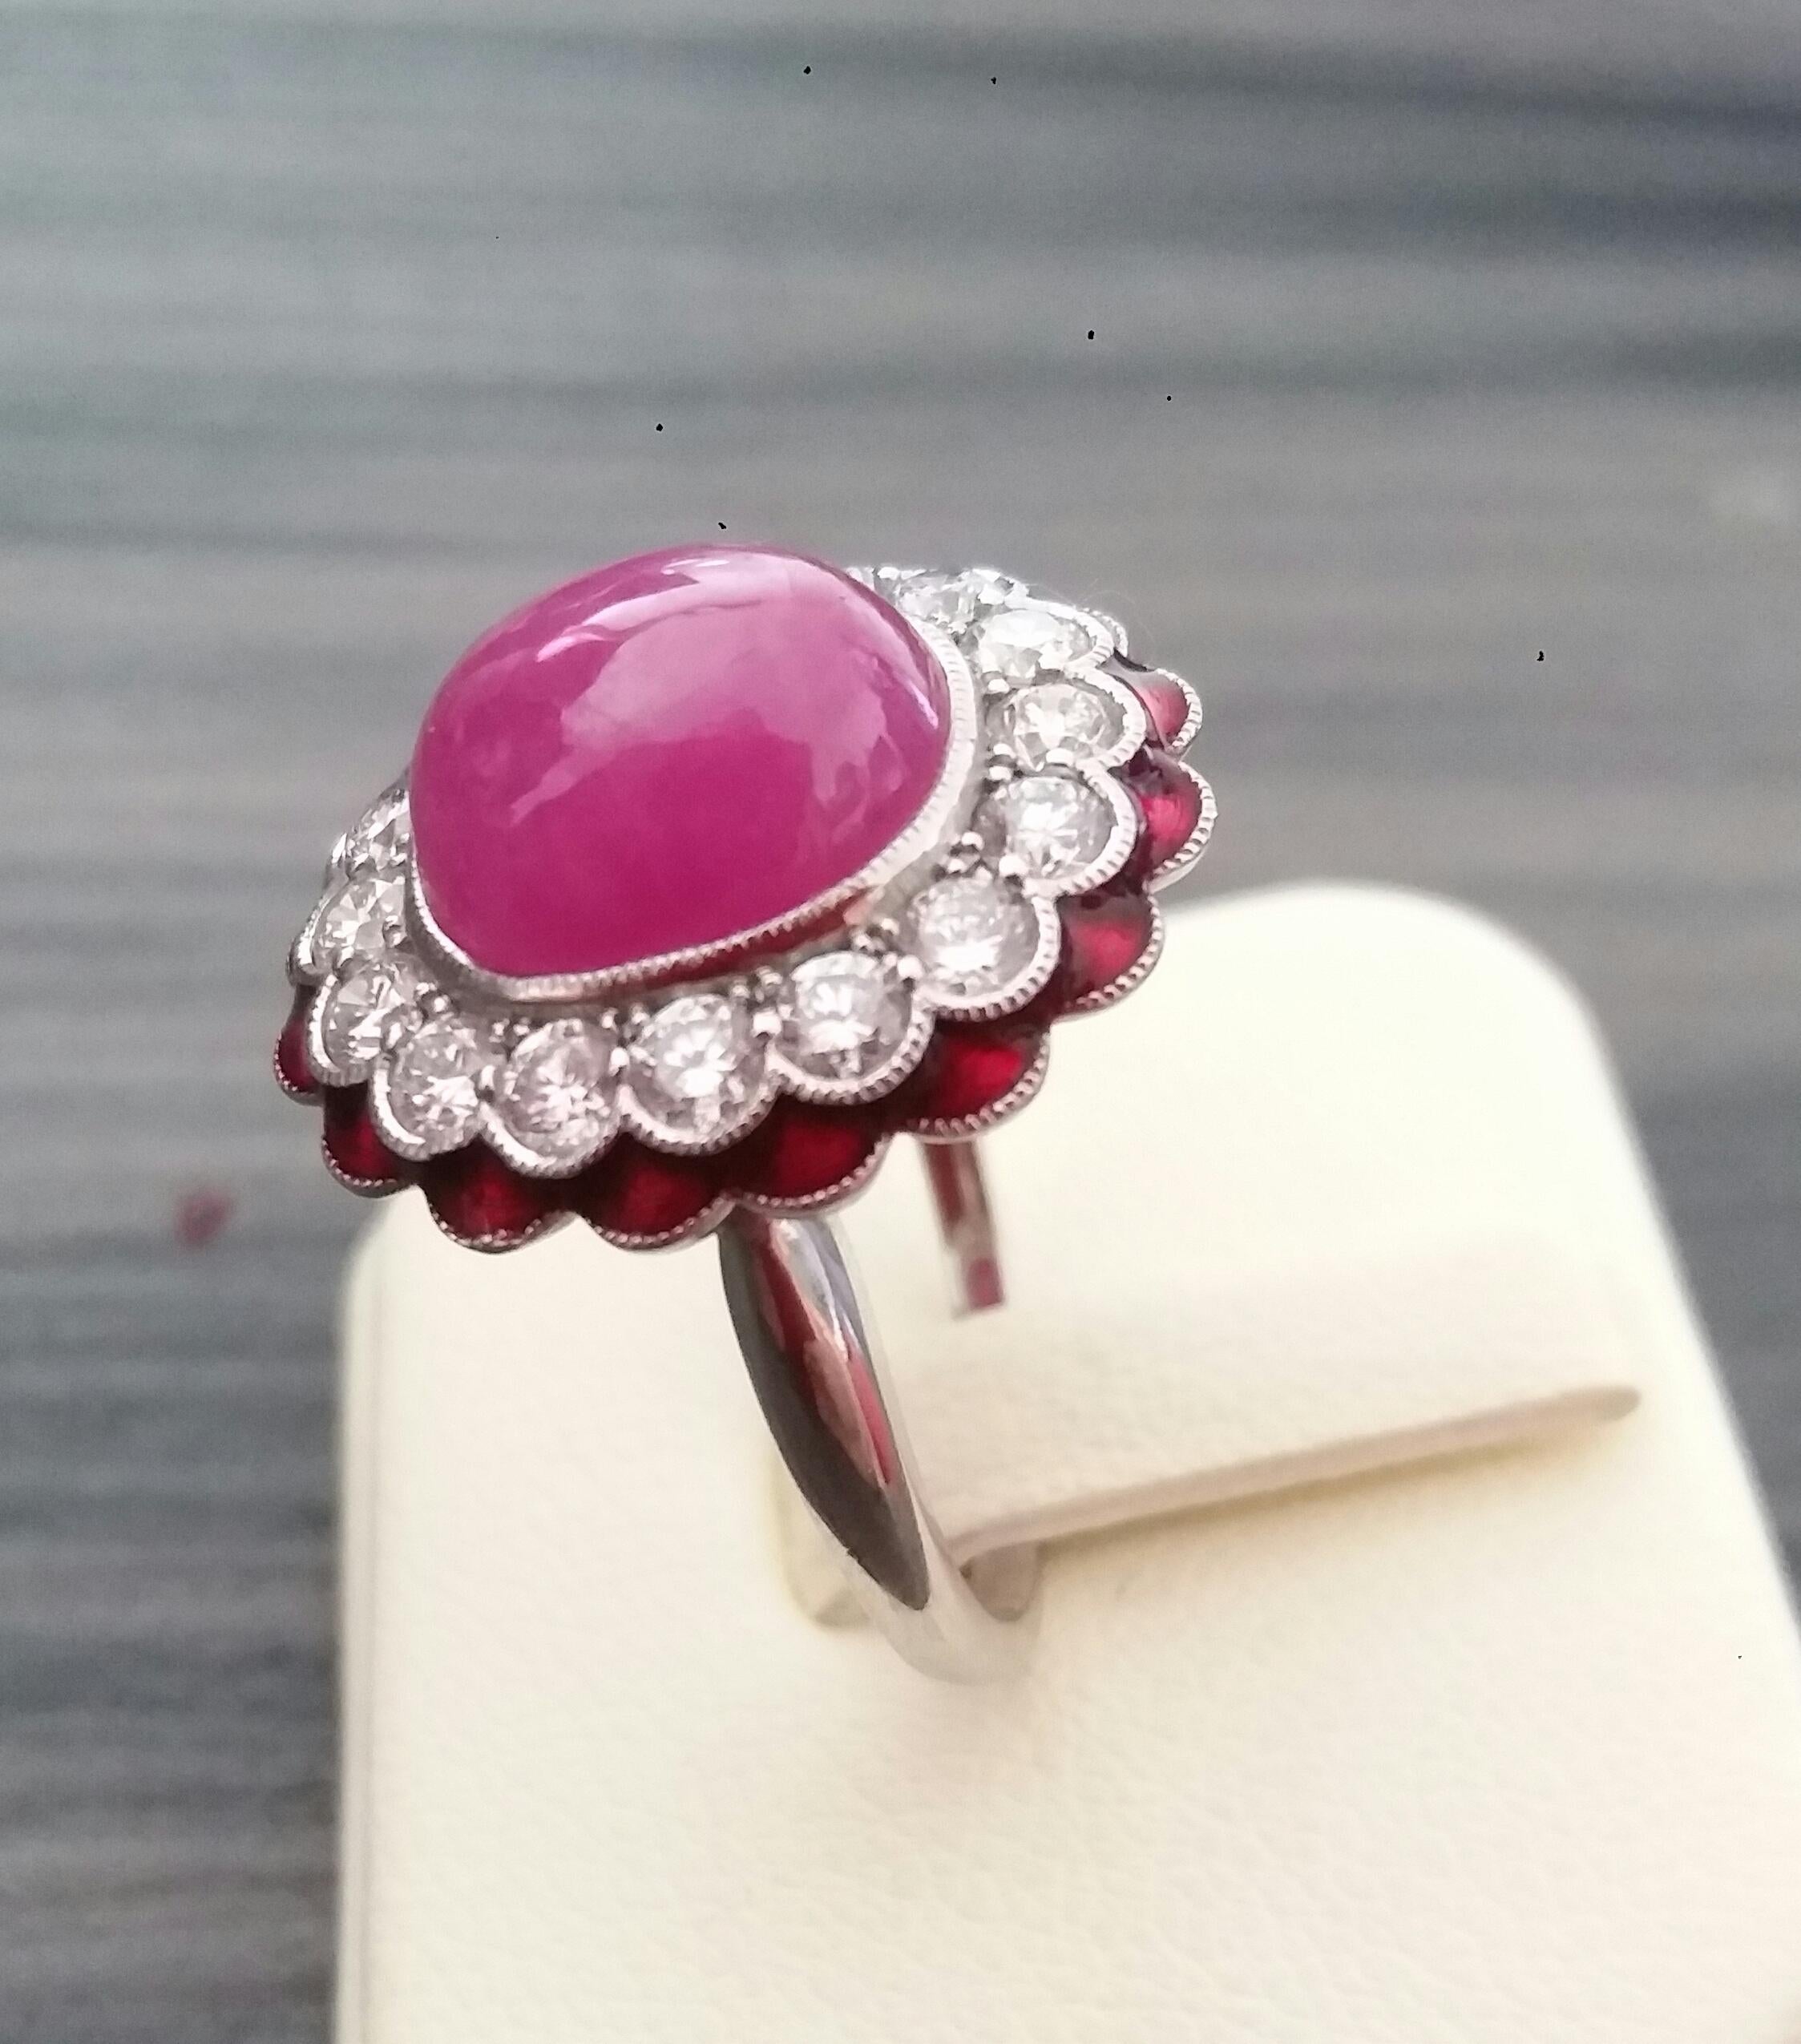 10 Carat Oval Ruby Cab 1 Carat Diamonds Red Enamel 14K White Gold Cocktail Ring For Sale 10